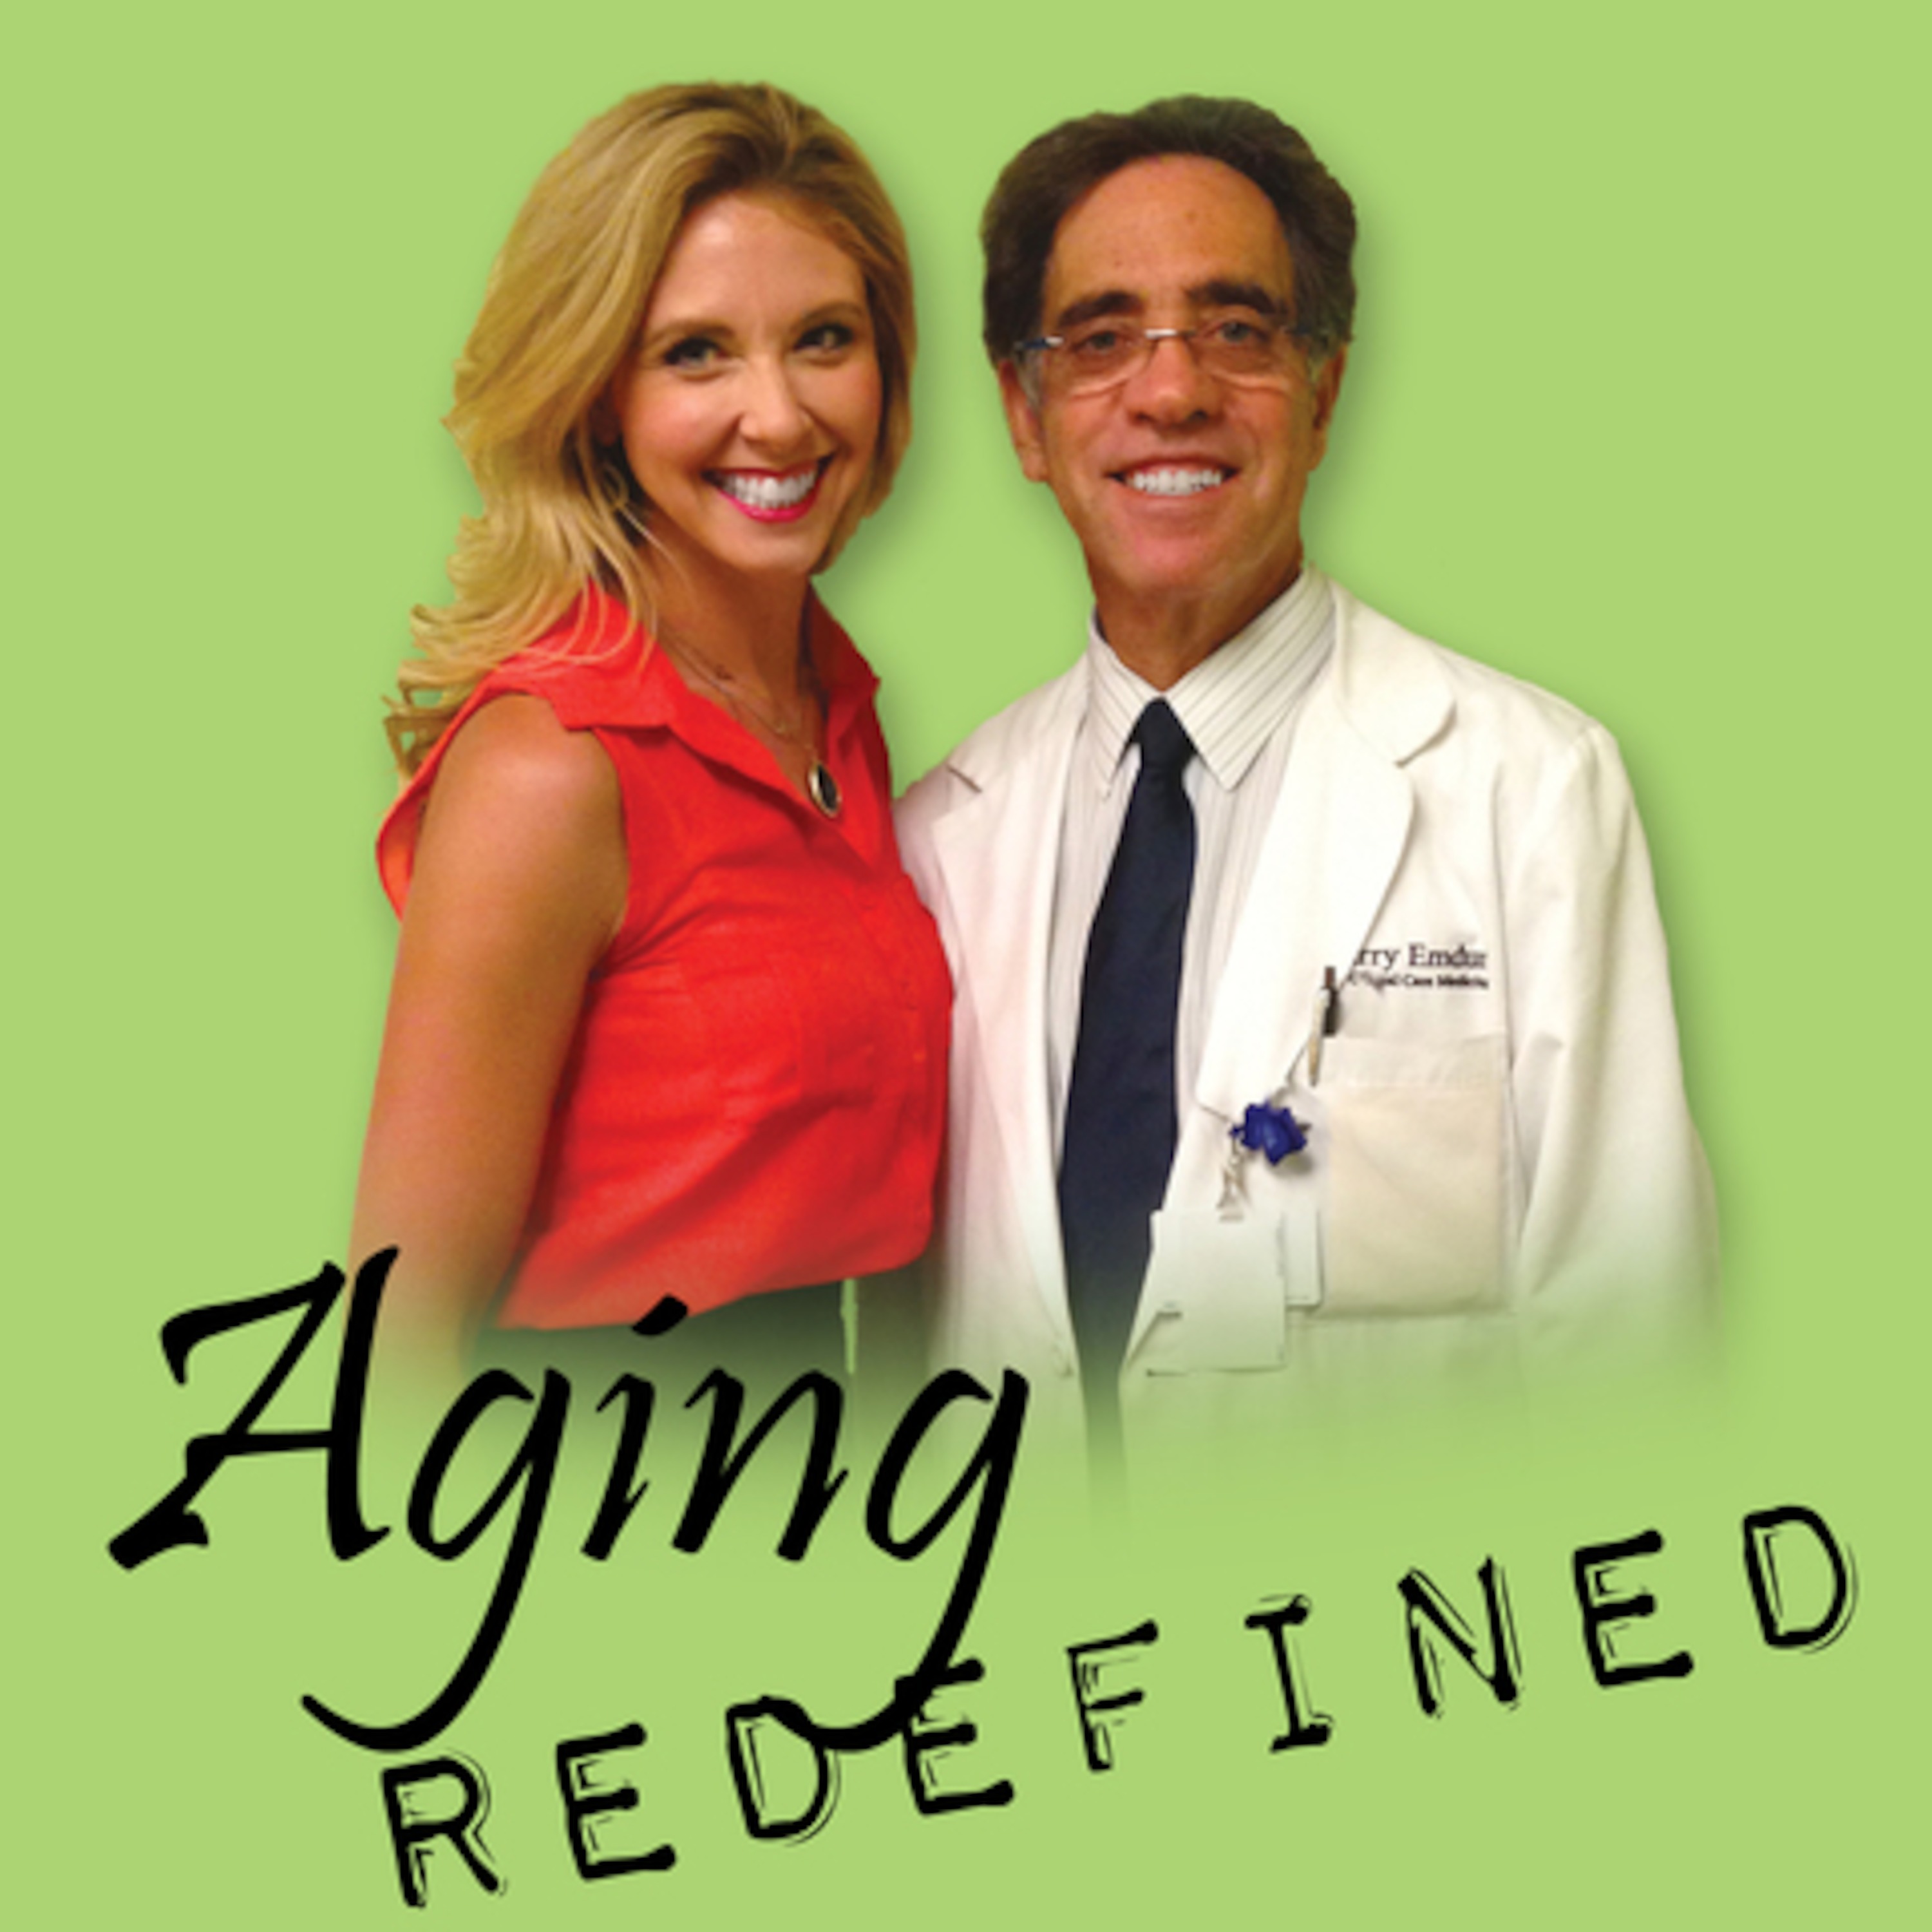 Healthy Aging Podcast hosted by Kendra Vallone and Dr. Larry Emdur